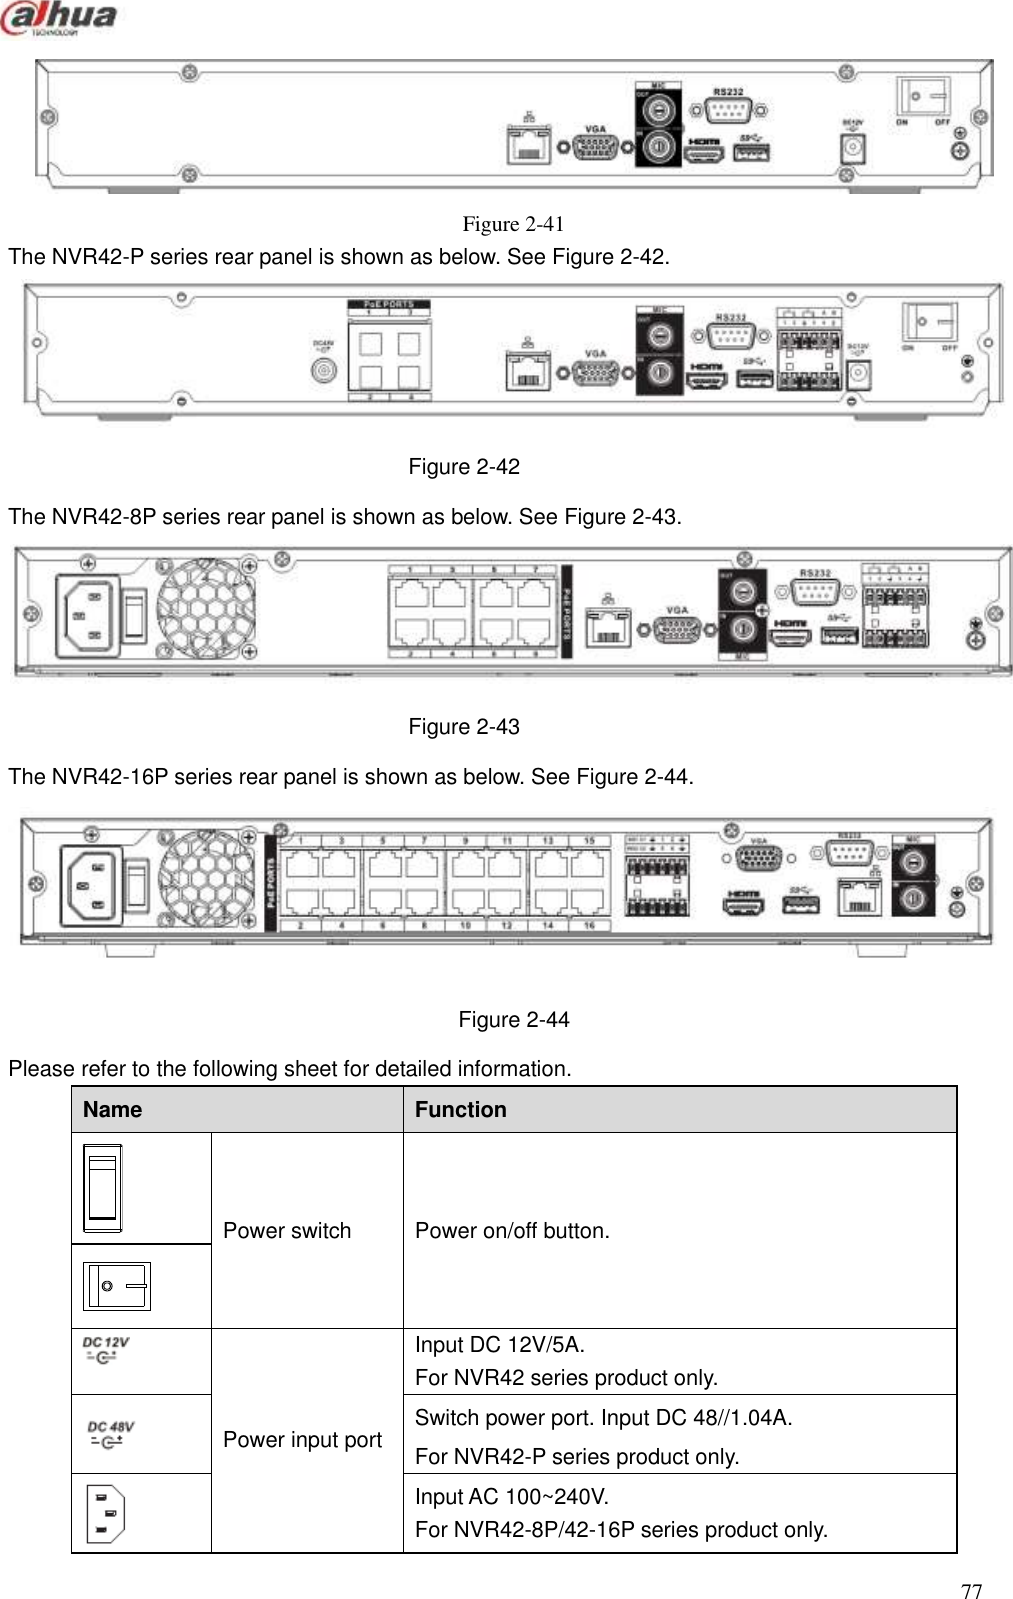  77   Figure 2-41 The NVR42-P series rear panel is shown as below. See Figure 2-42.  Figure 2-42 The NVR42-8P series rear panel is shown as below. See Figure 2-43.  Figure 2-43   The NVR42-16P series rear panel is shown as below. See Figure 2-44.  Figure 2-44 Please refer to the following sheet for detailed information. Name   Function    Power switch Power on/off button.   Power input port   Input DC 12V/5A. For NVR42 series product only.  Switch power port. Input DC 48//1.04A. For NVR42-P series product only.  Input AC 100~240V. For NVR42-8P/42-16P series product only. 